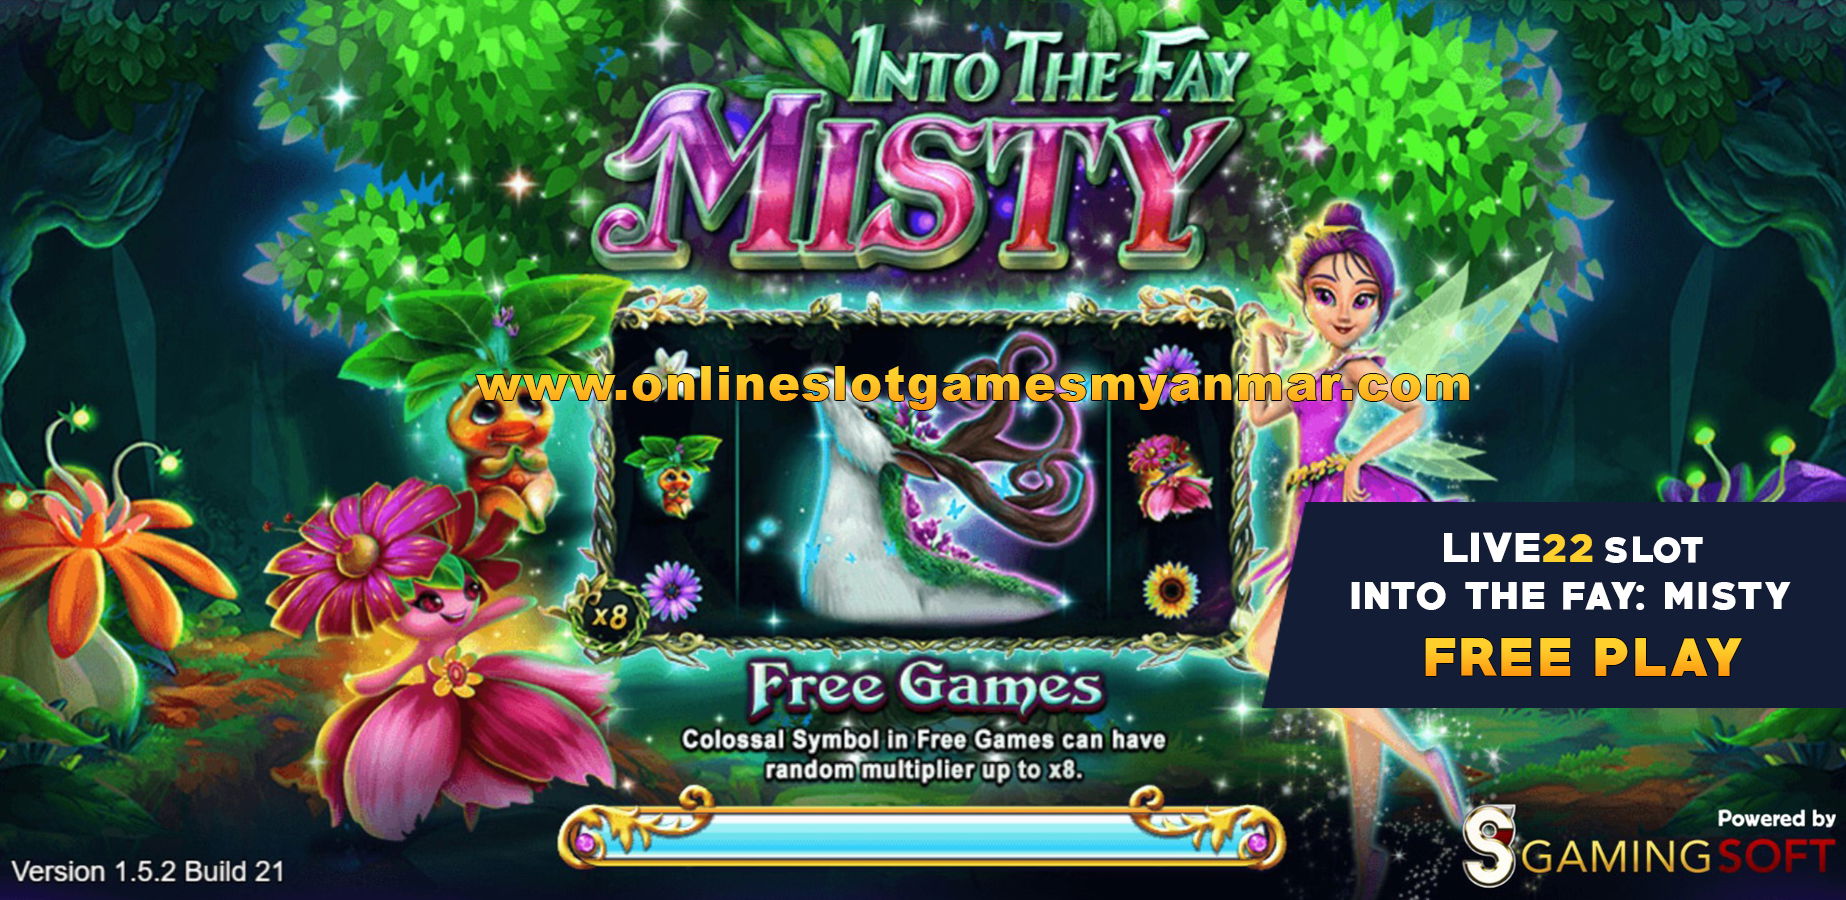 Free Play 3 Into The Fay Misty Slot Game - Live22 Myanmar (1)